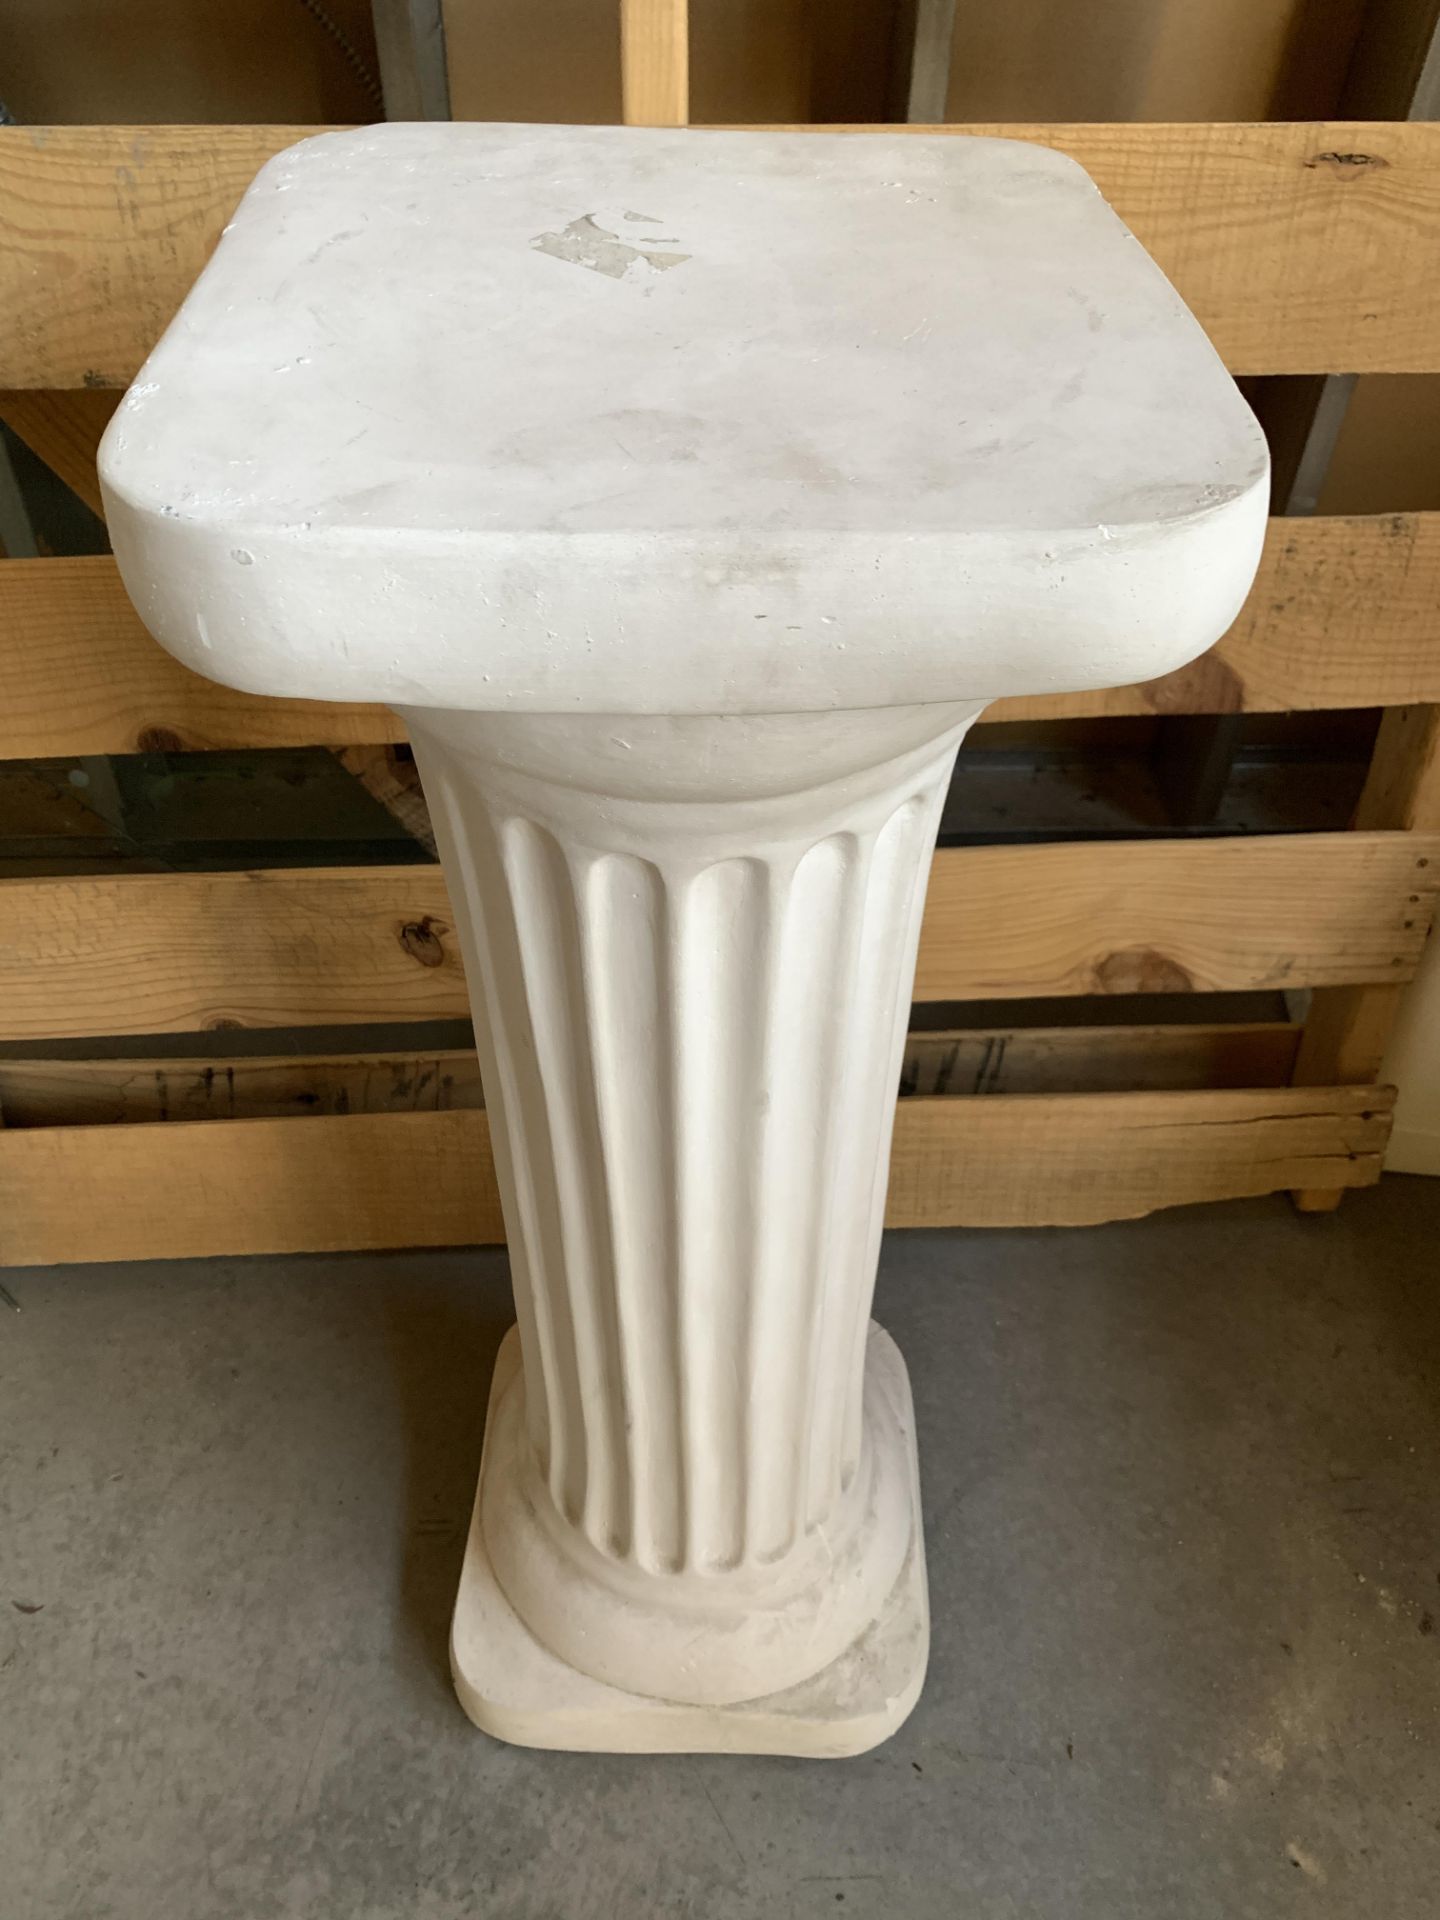 Column Pillar Decorative Stand, stands about 3' tall **Las Vegas Pick-Up only, see description** - Image 2 of 3